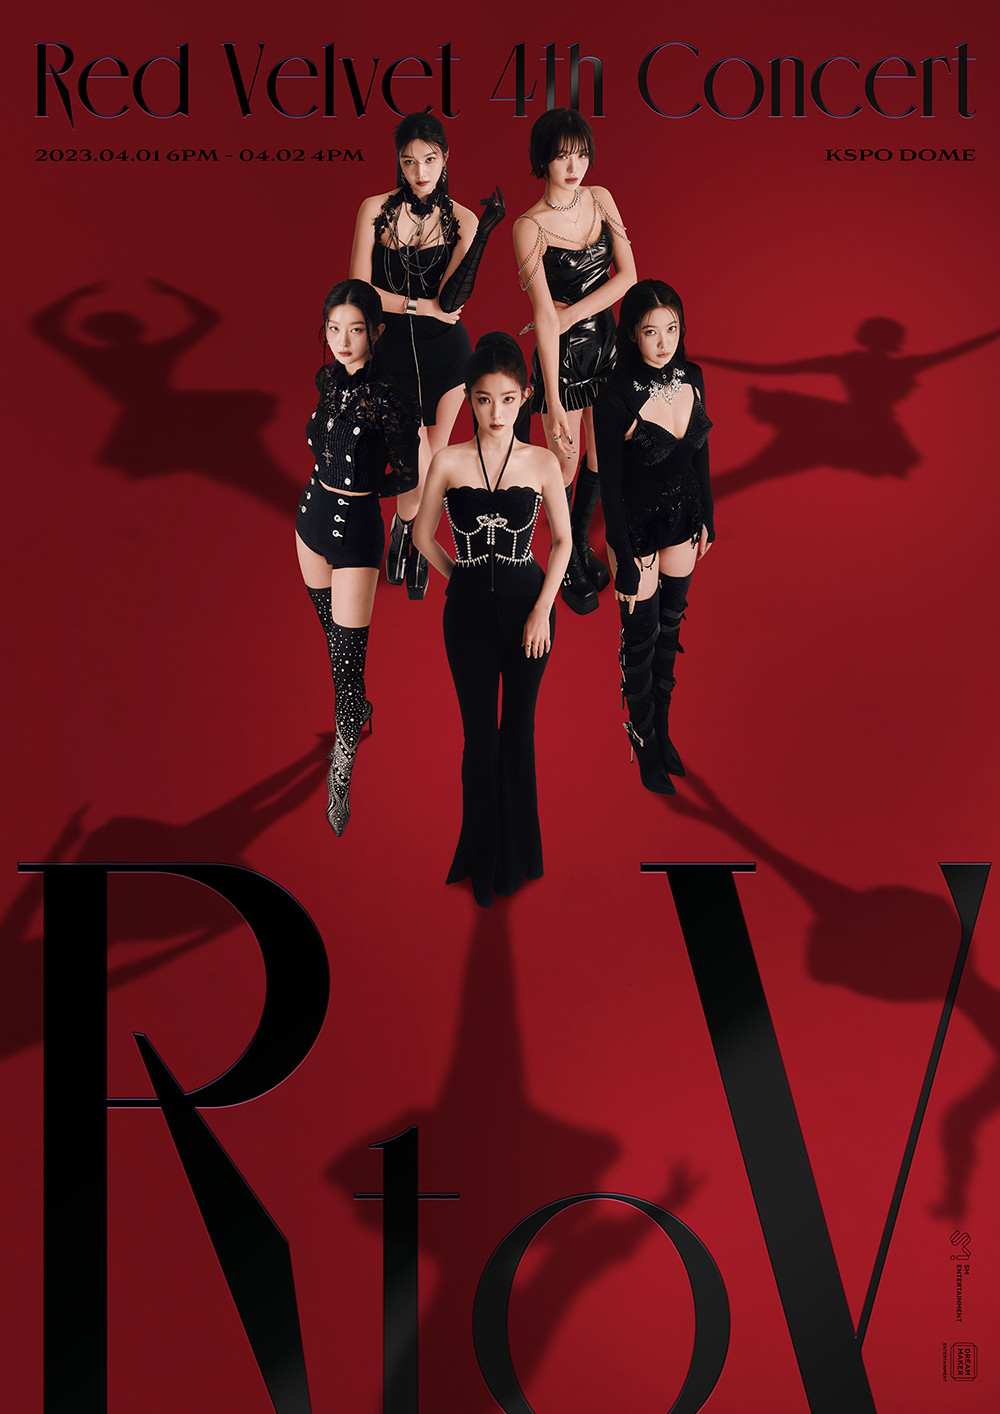 Red Velvet announce their 4th solo concert, 'R to |